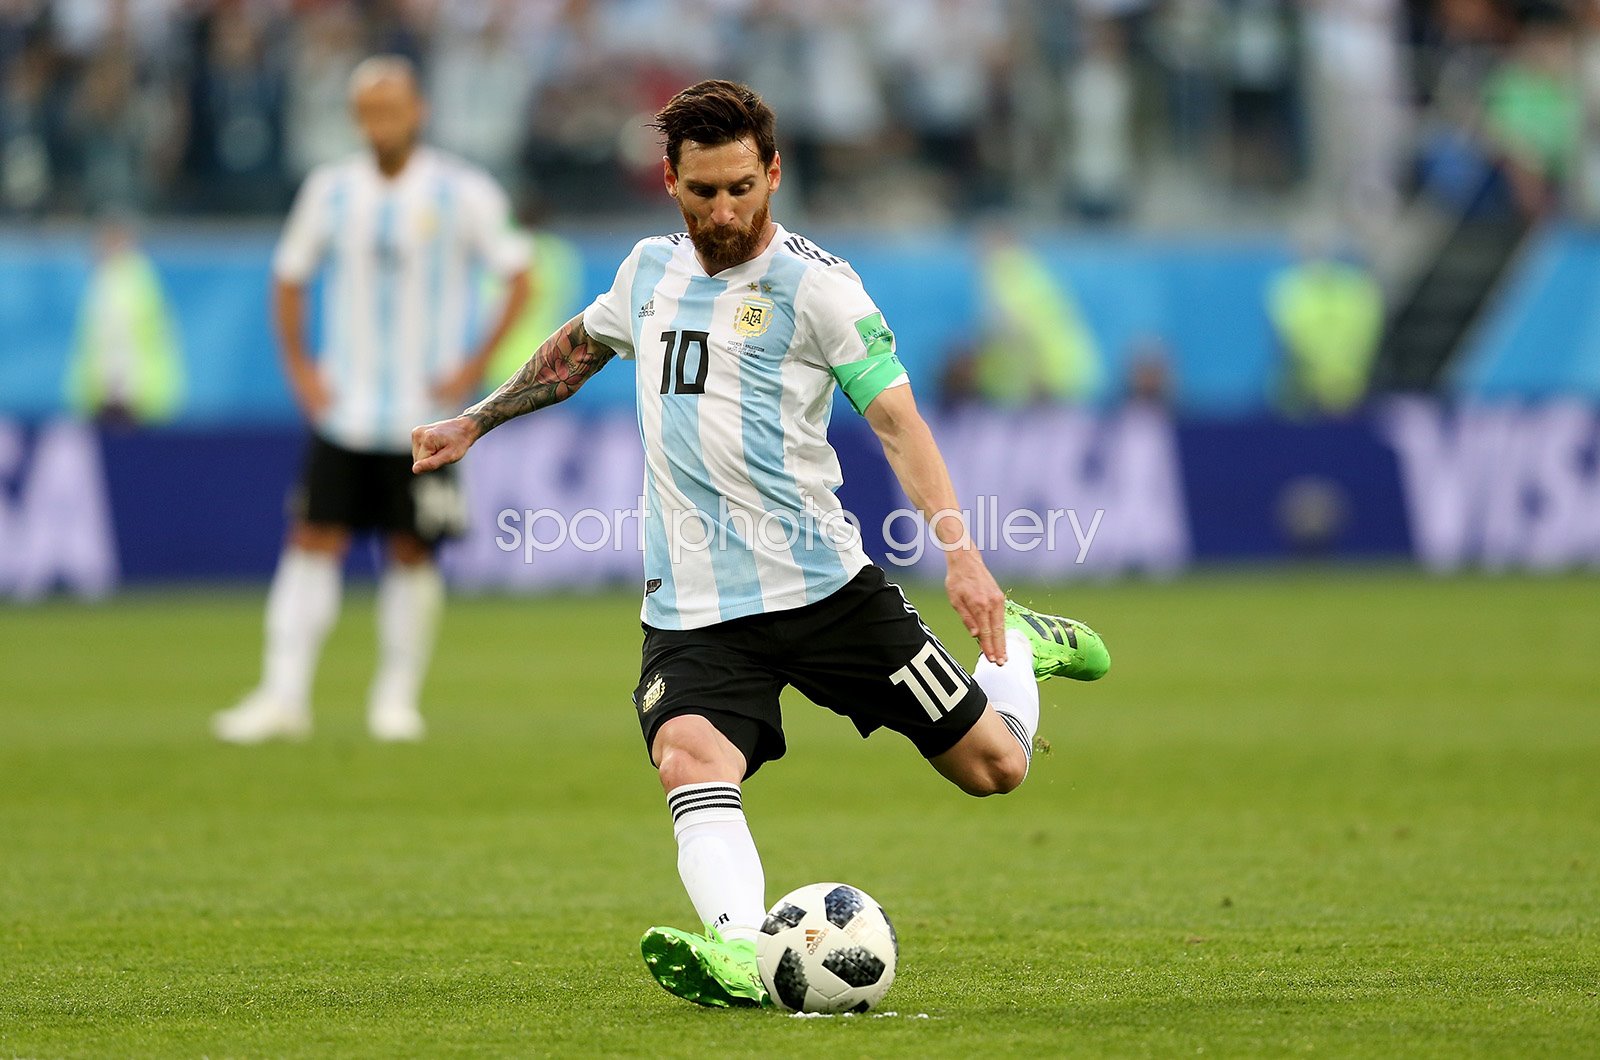 Lionel Messi Argentina V Nigeria World Cup 2018 Images Football Posters